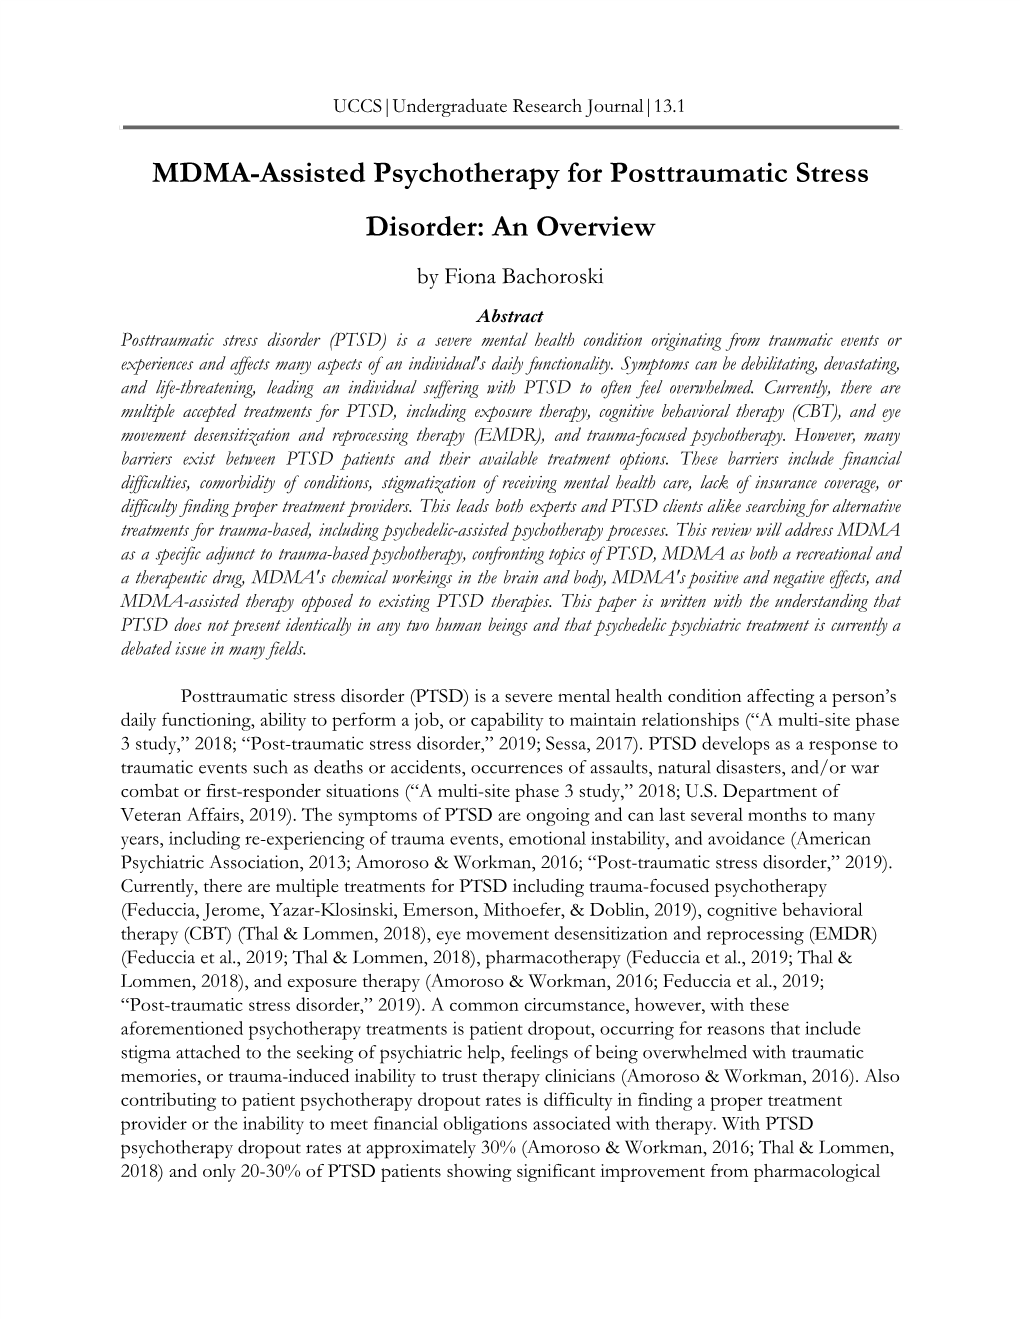 MDMA-Assisted Psychotherapy for Posttraumatic Stress Disorder: an Overview